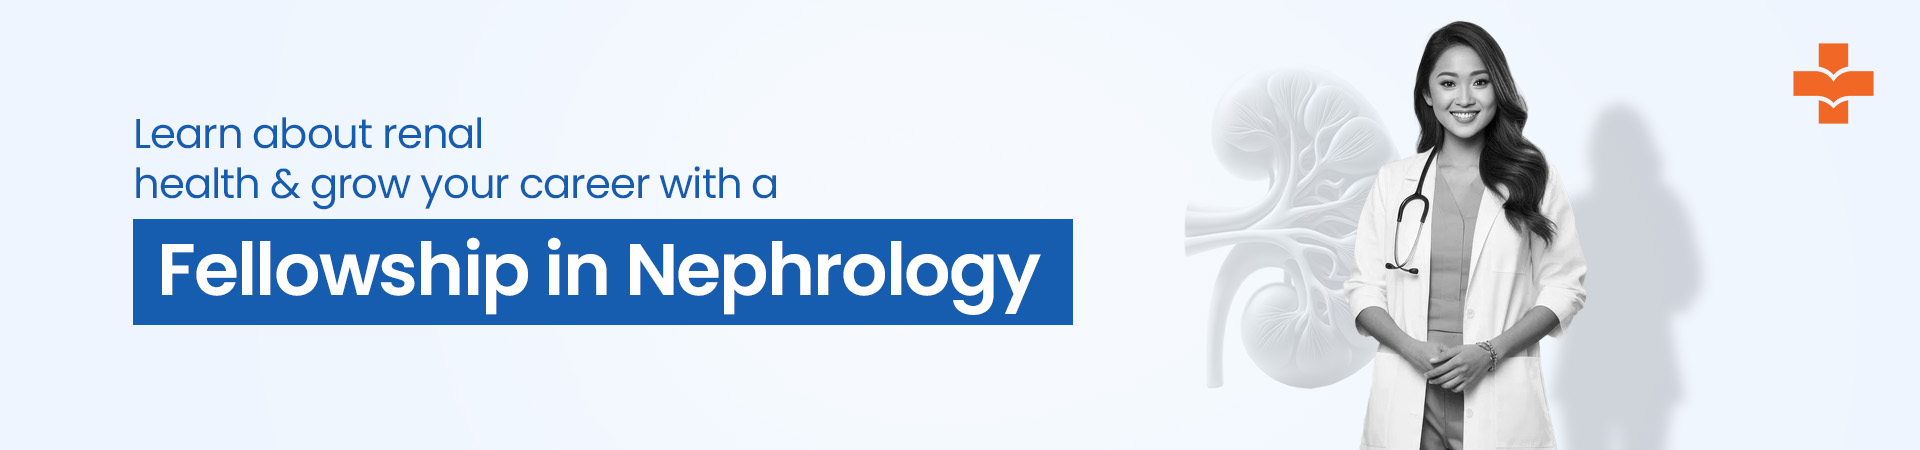 nephrology fellowship after MBBS in India